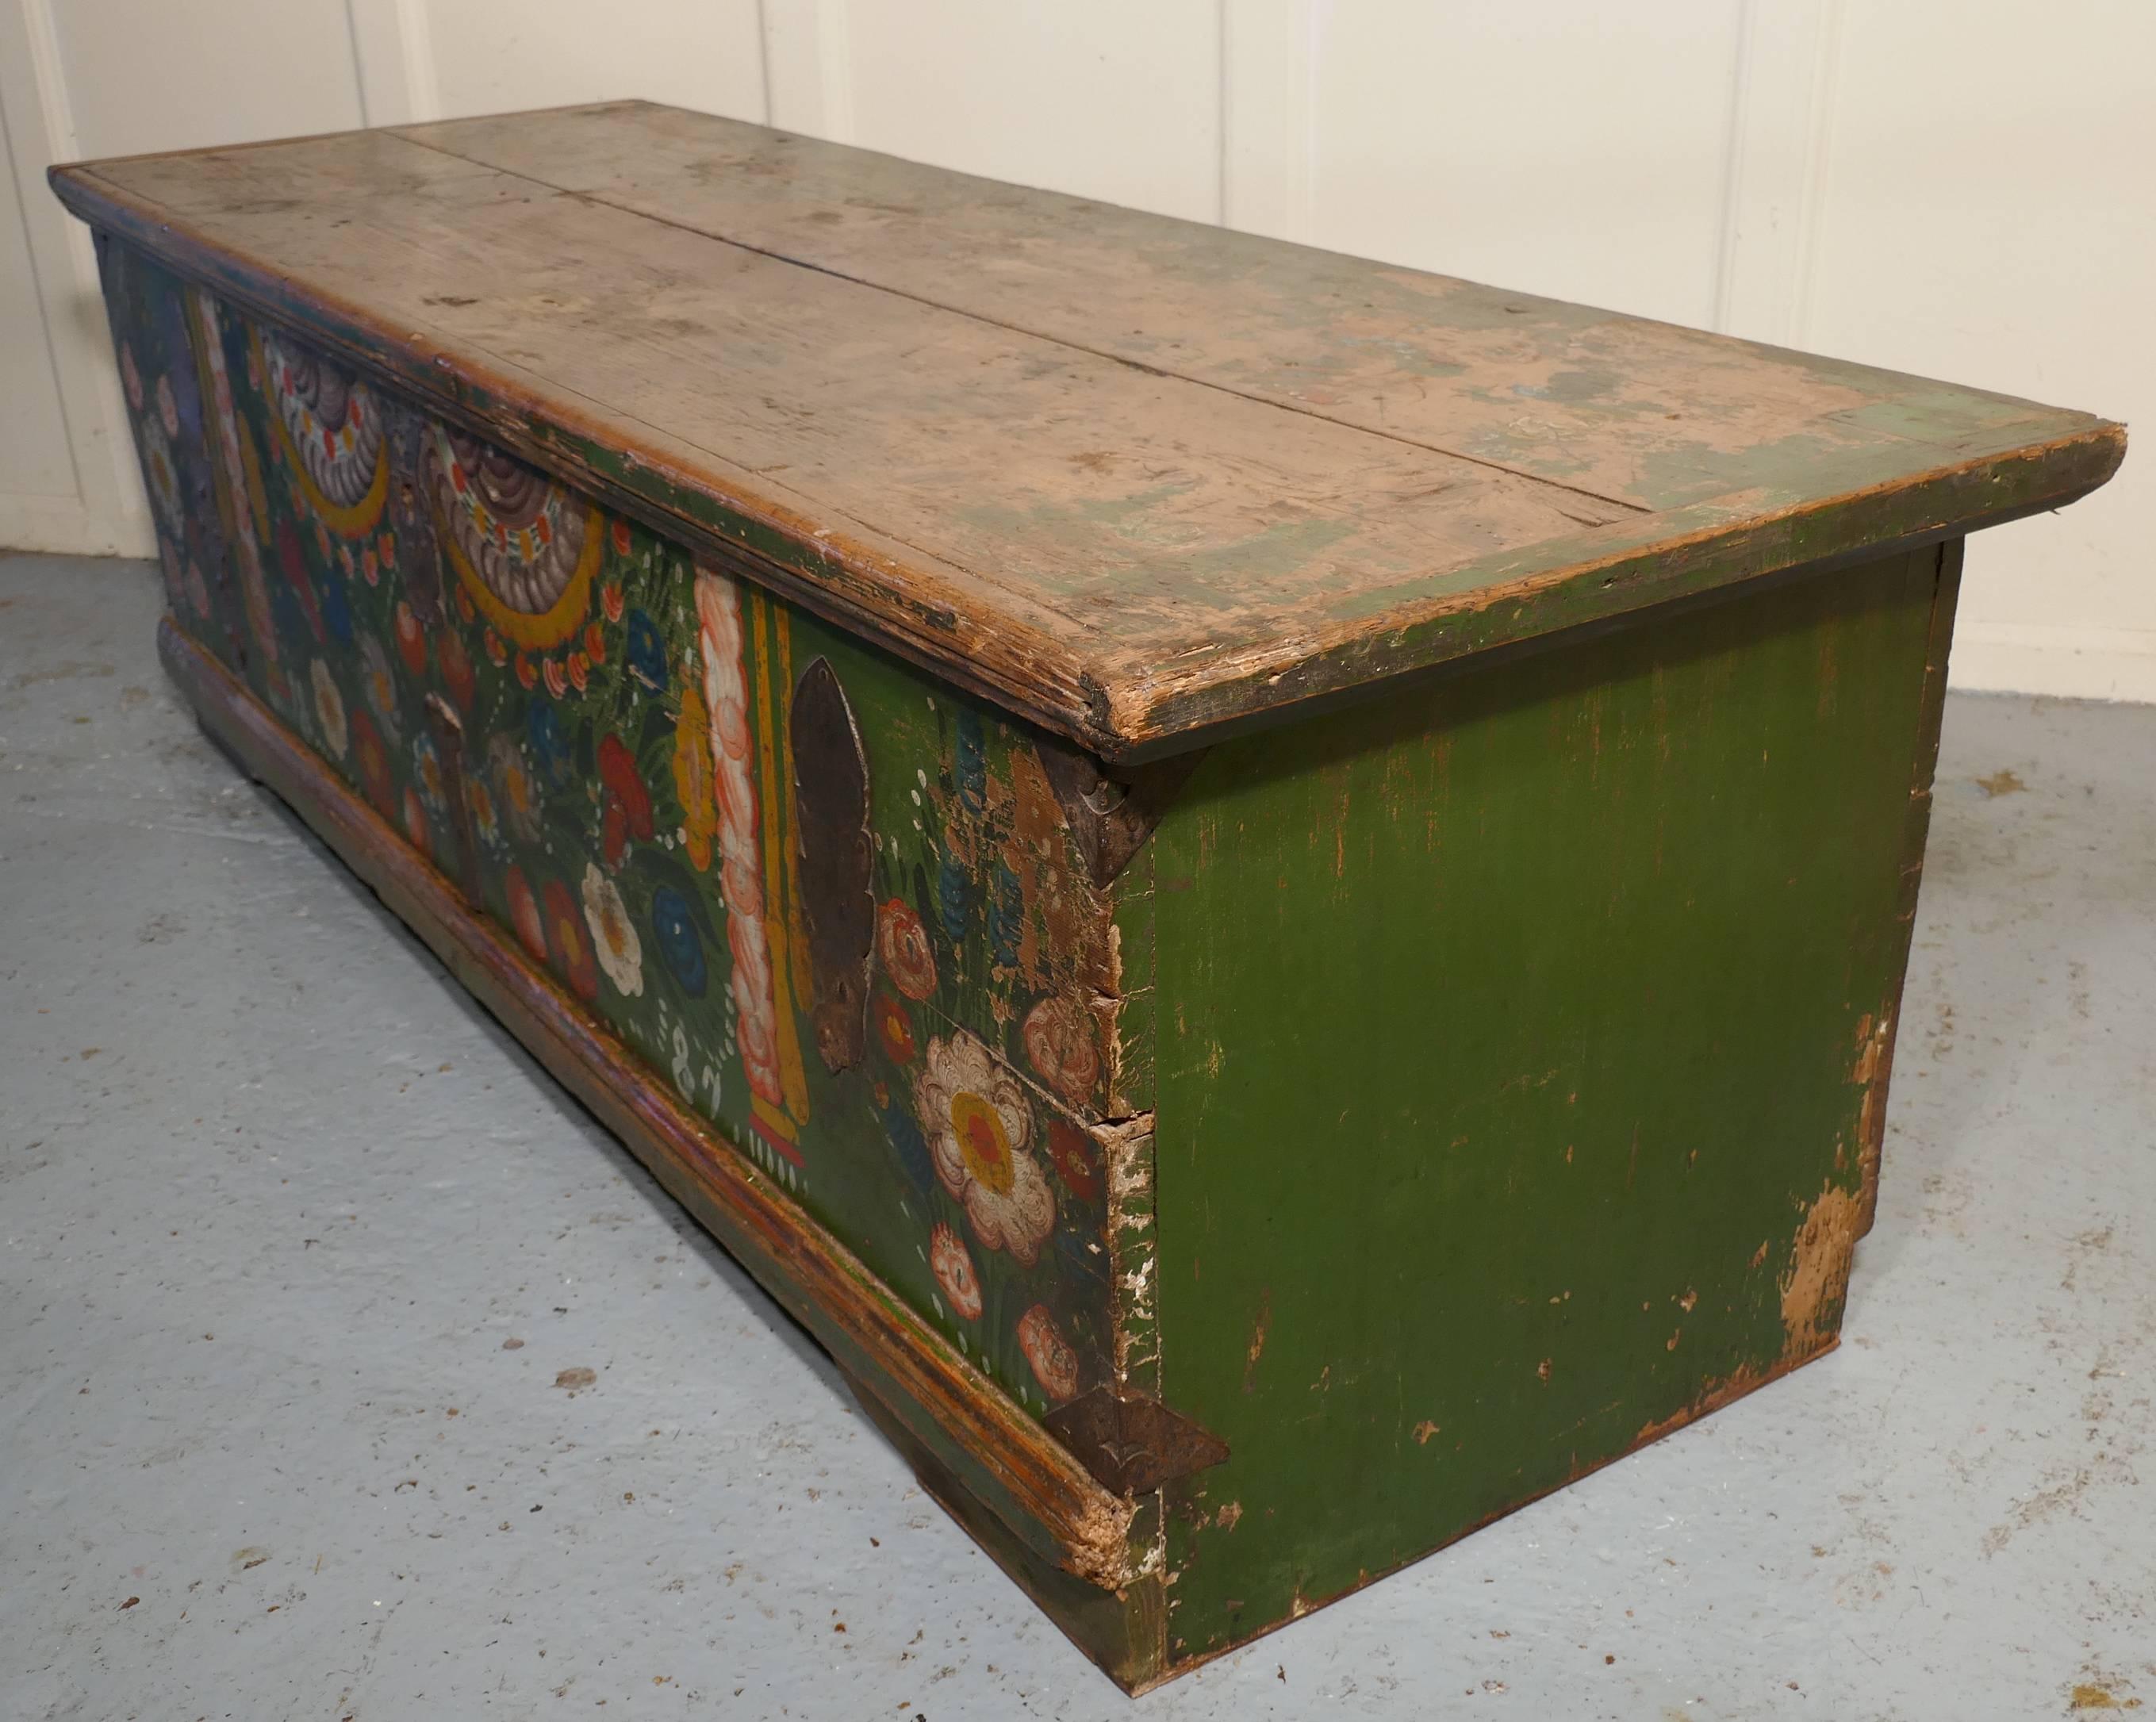 European Folk Art painted pine chest

This is an unusual piece, the chest has been partly stripped back revealing wonderful painted decoration, much of this seems to have been lost either when it was repainted or when it was stripped, but there is